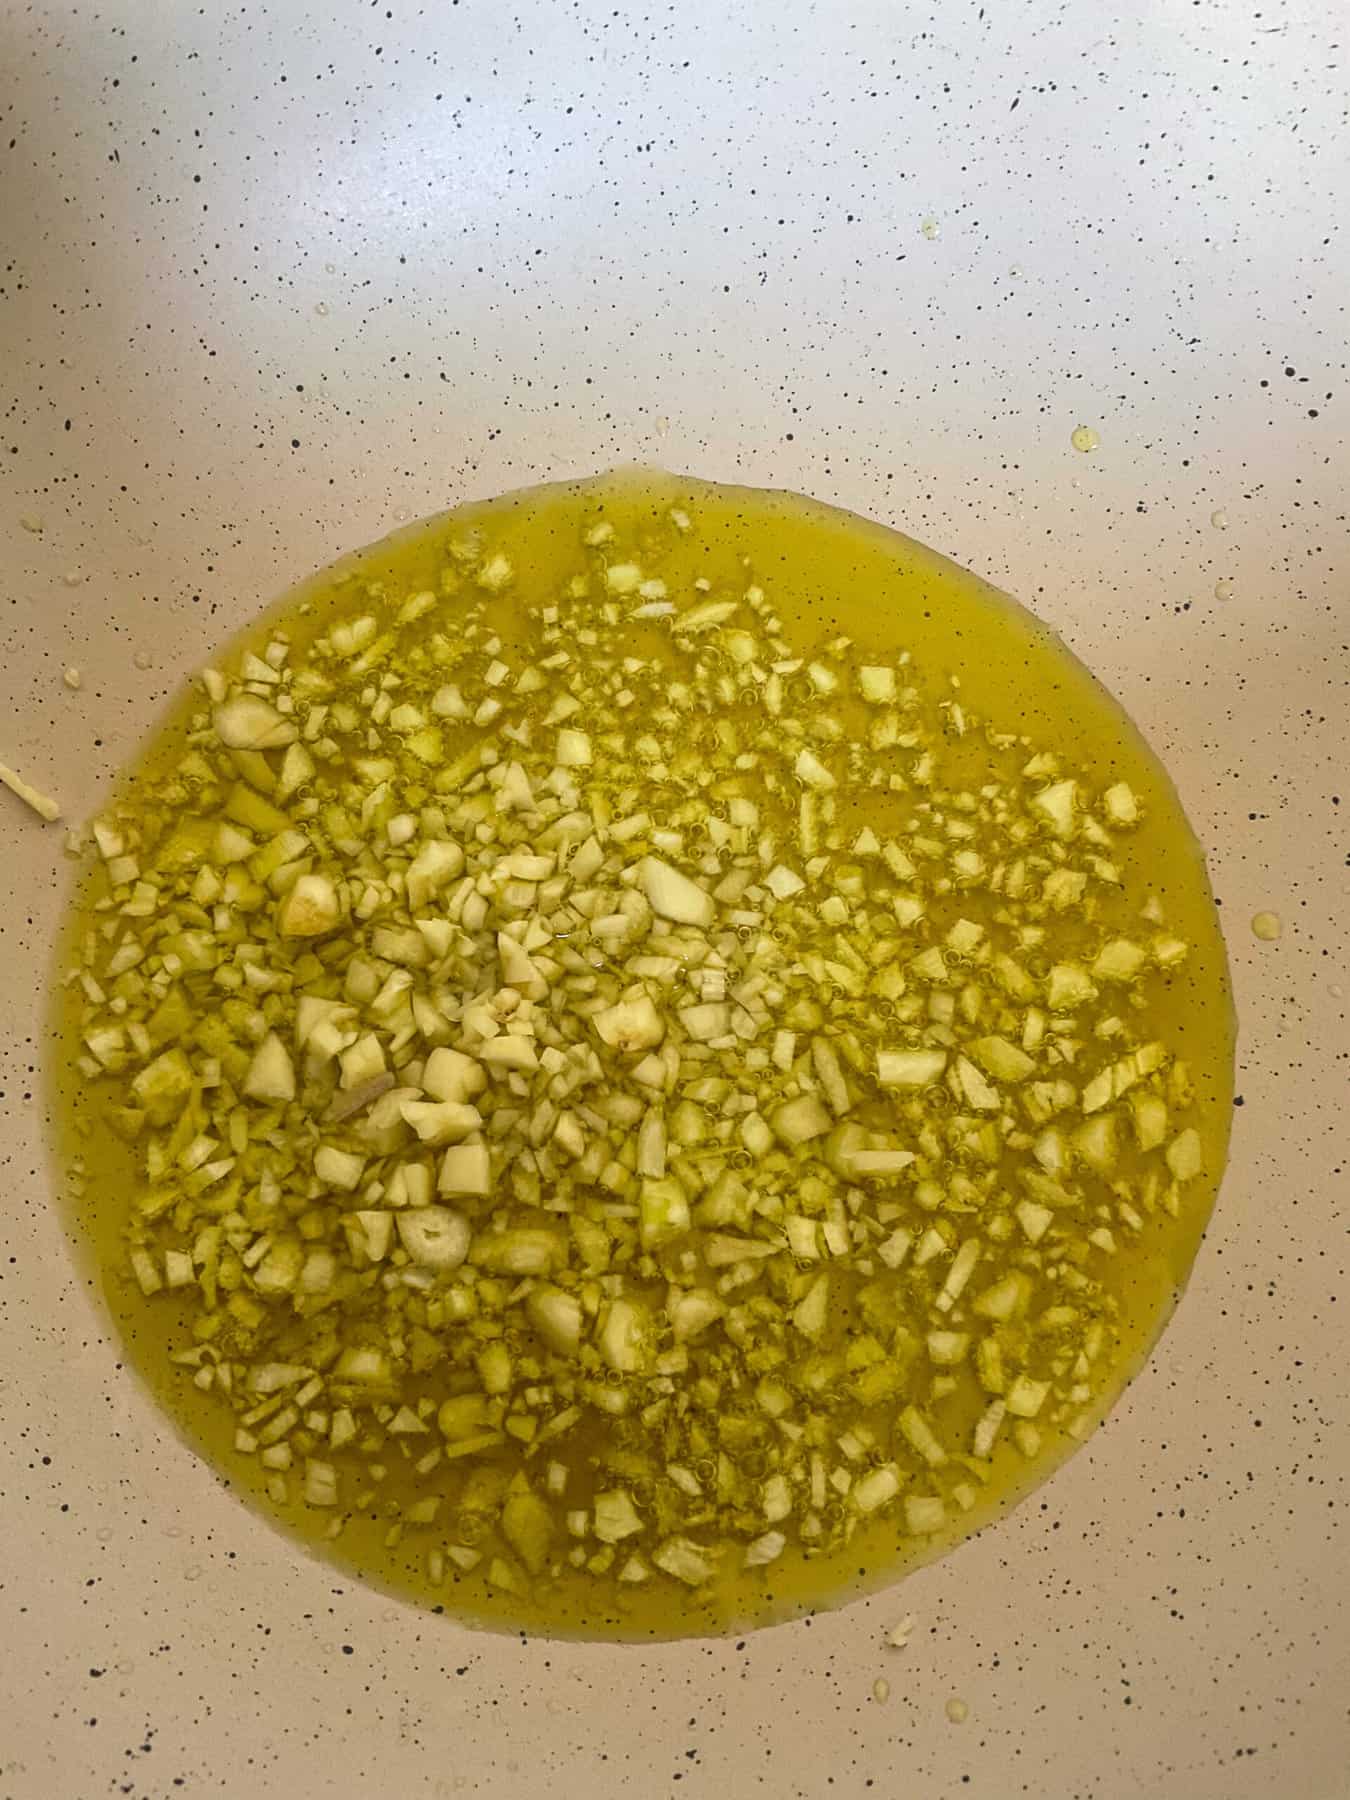 Garlic and olive oil cooking in cream coloured large fry pan.